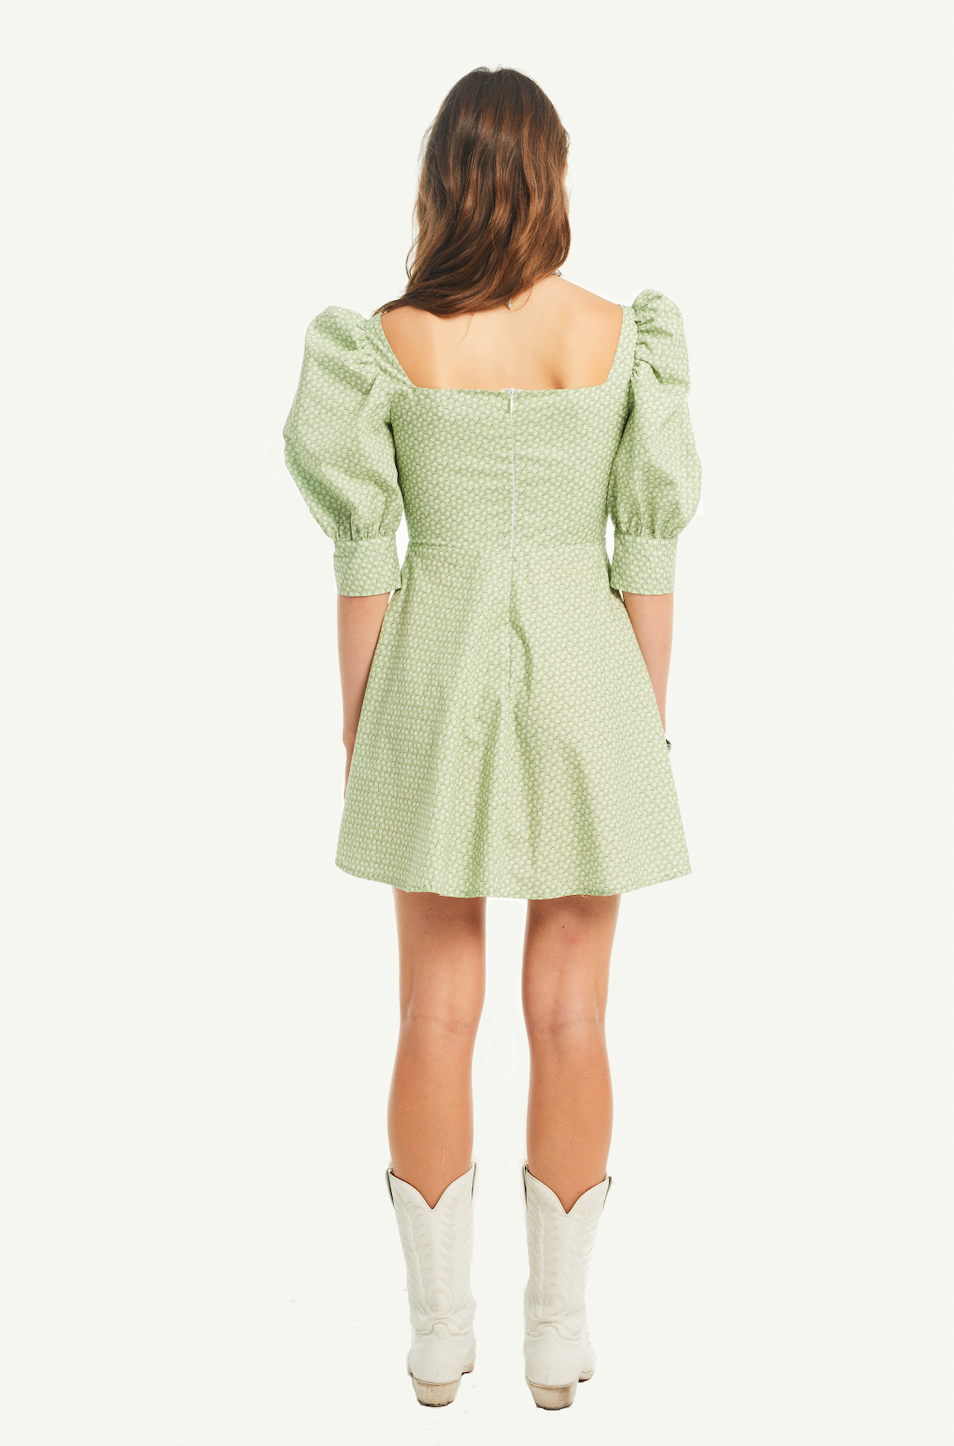 MIMOSA - dress with square neck and puffball sleeves in broderie anglaise